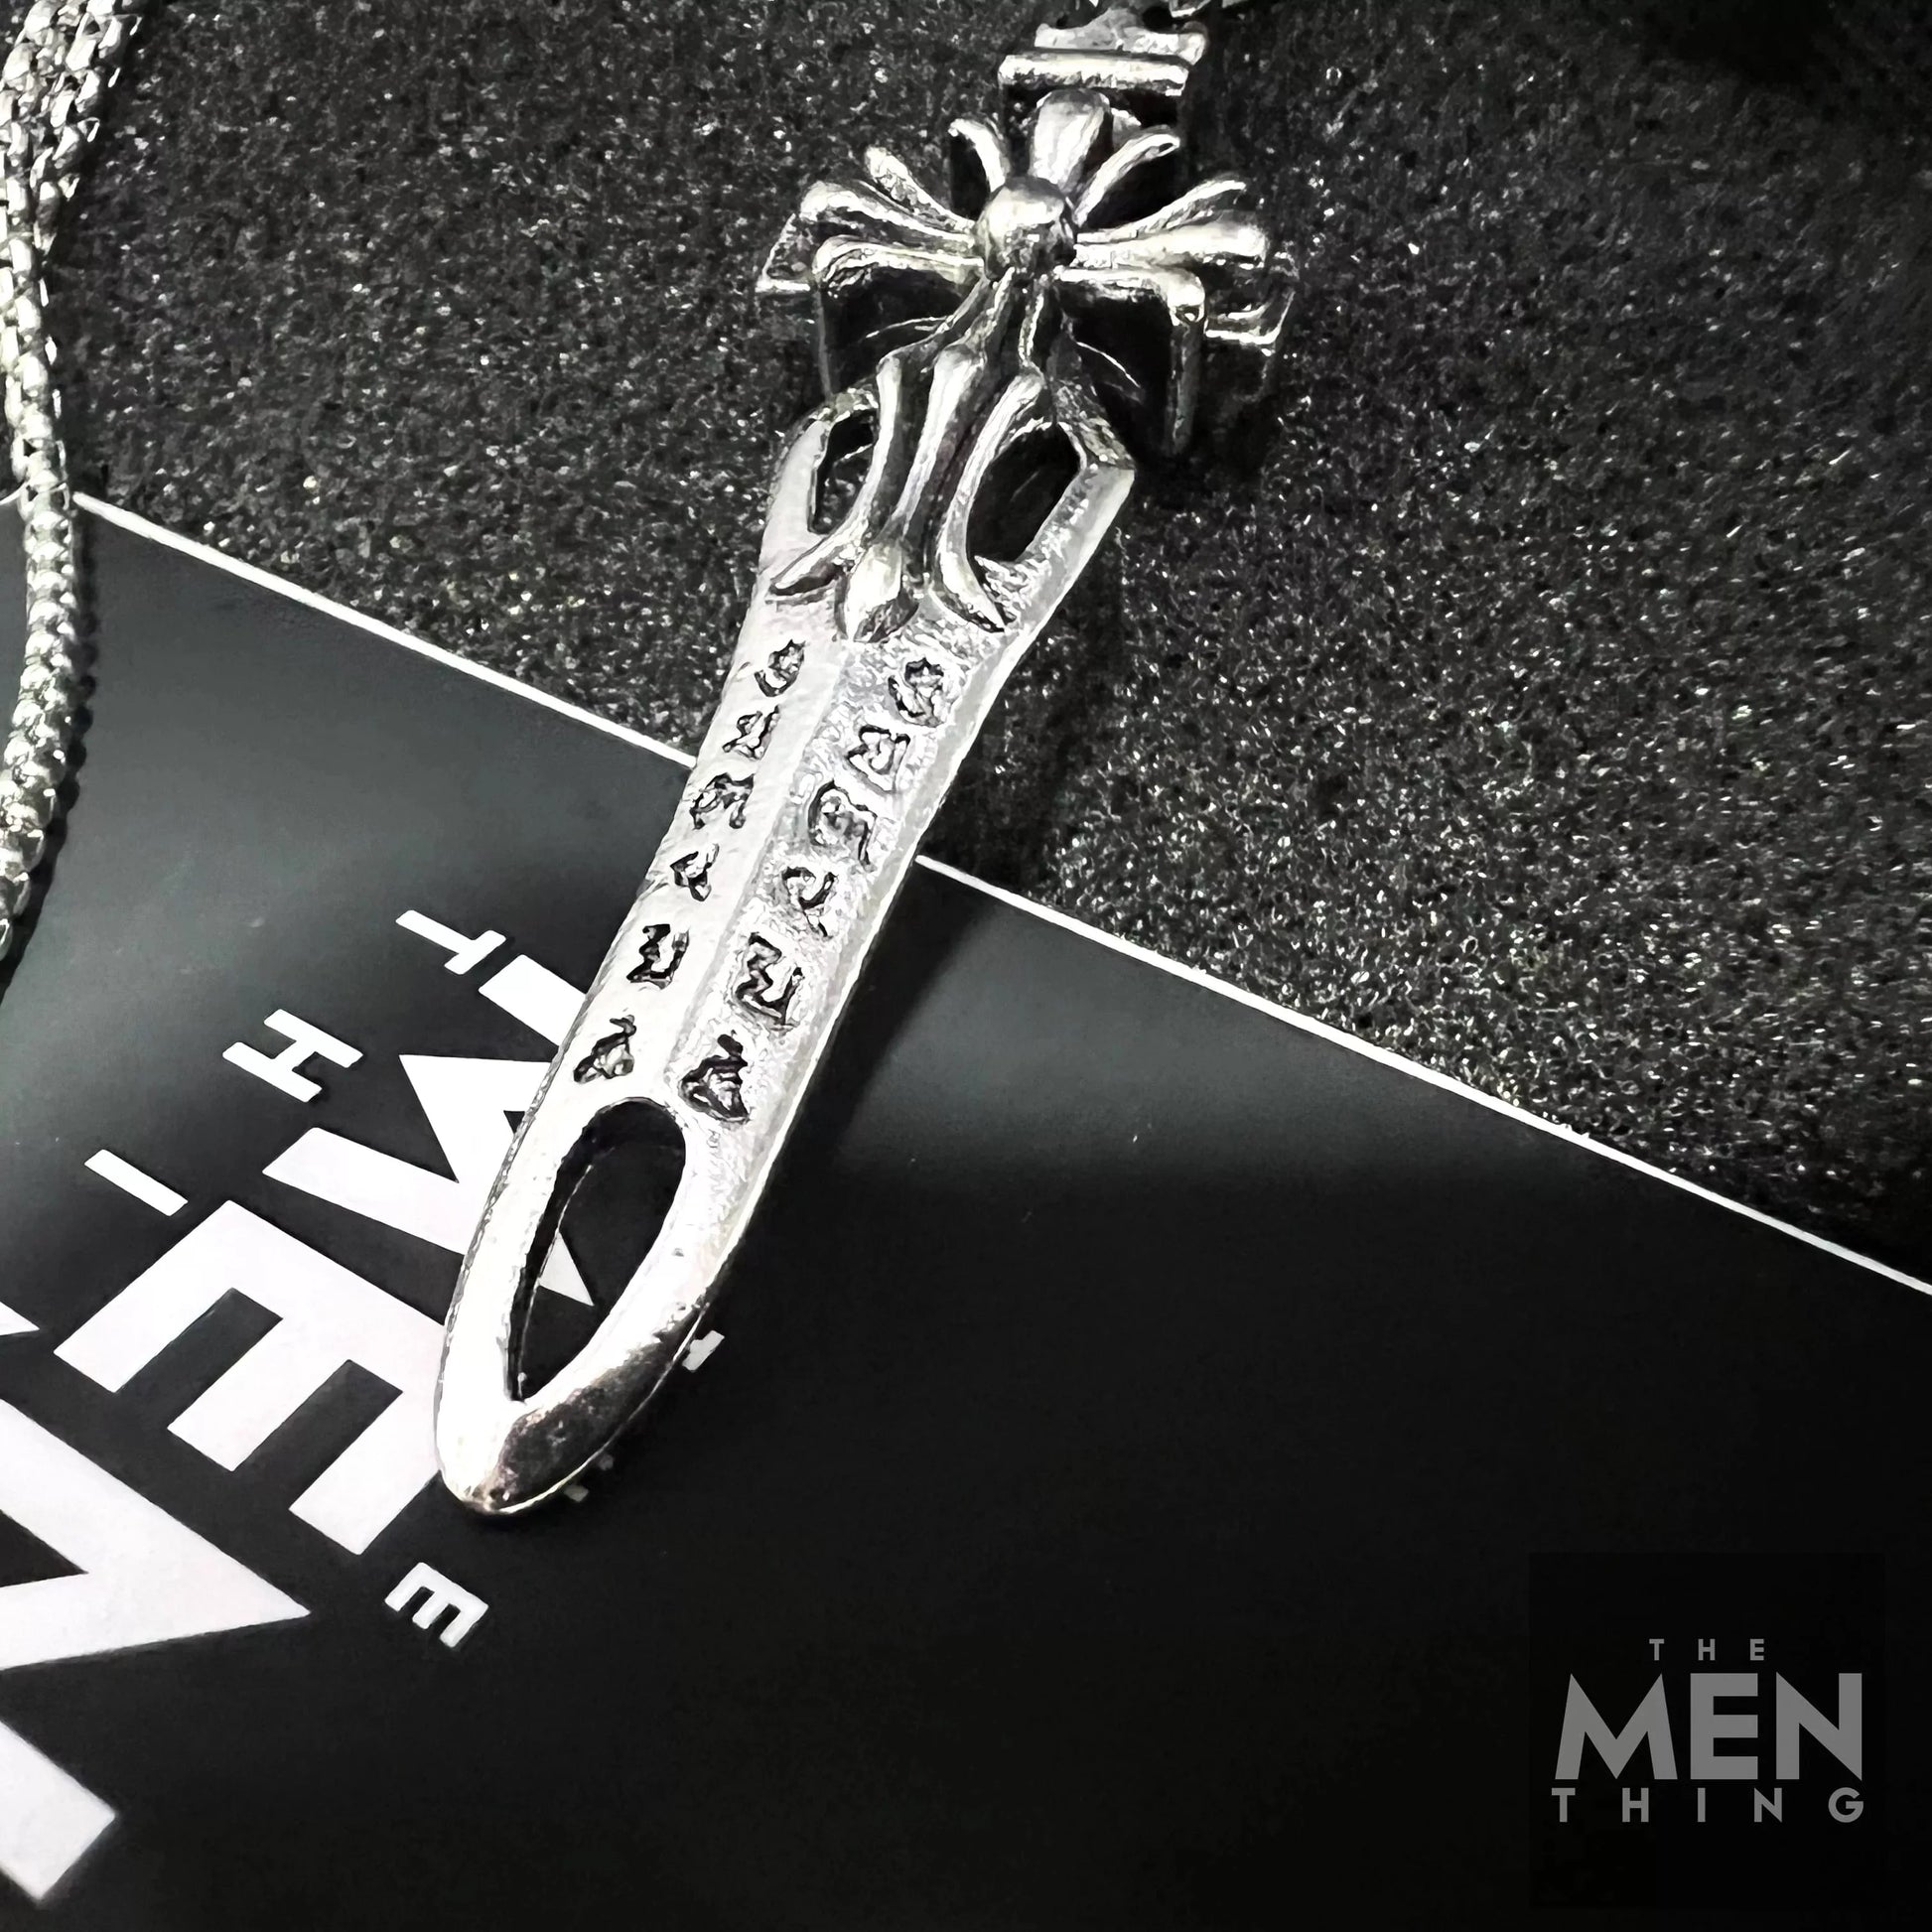 THE MEN THING Alloy Sword Plus Pendant with Pure Stainless Steel 24inch Chain for Men, American trending Style - Round Box Chain & Pendant for Men & Boy